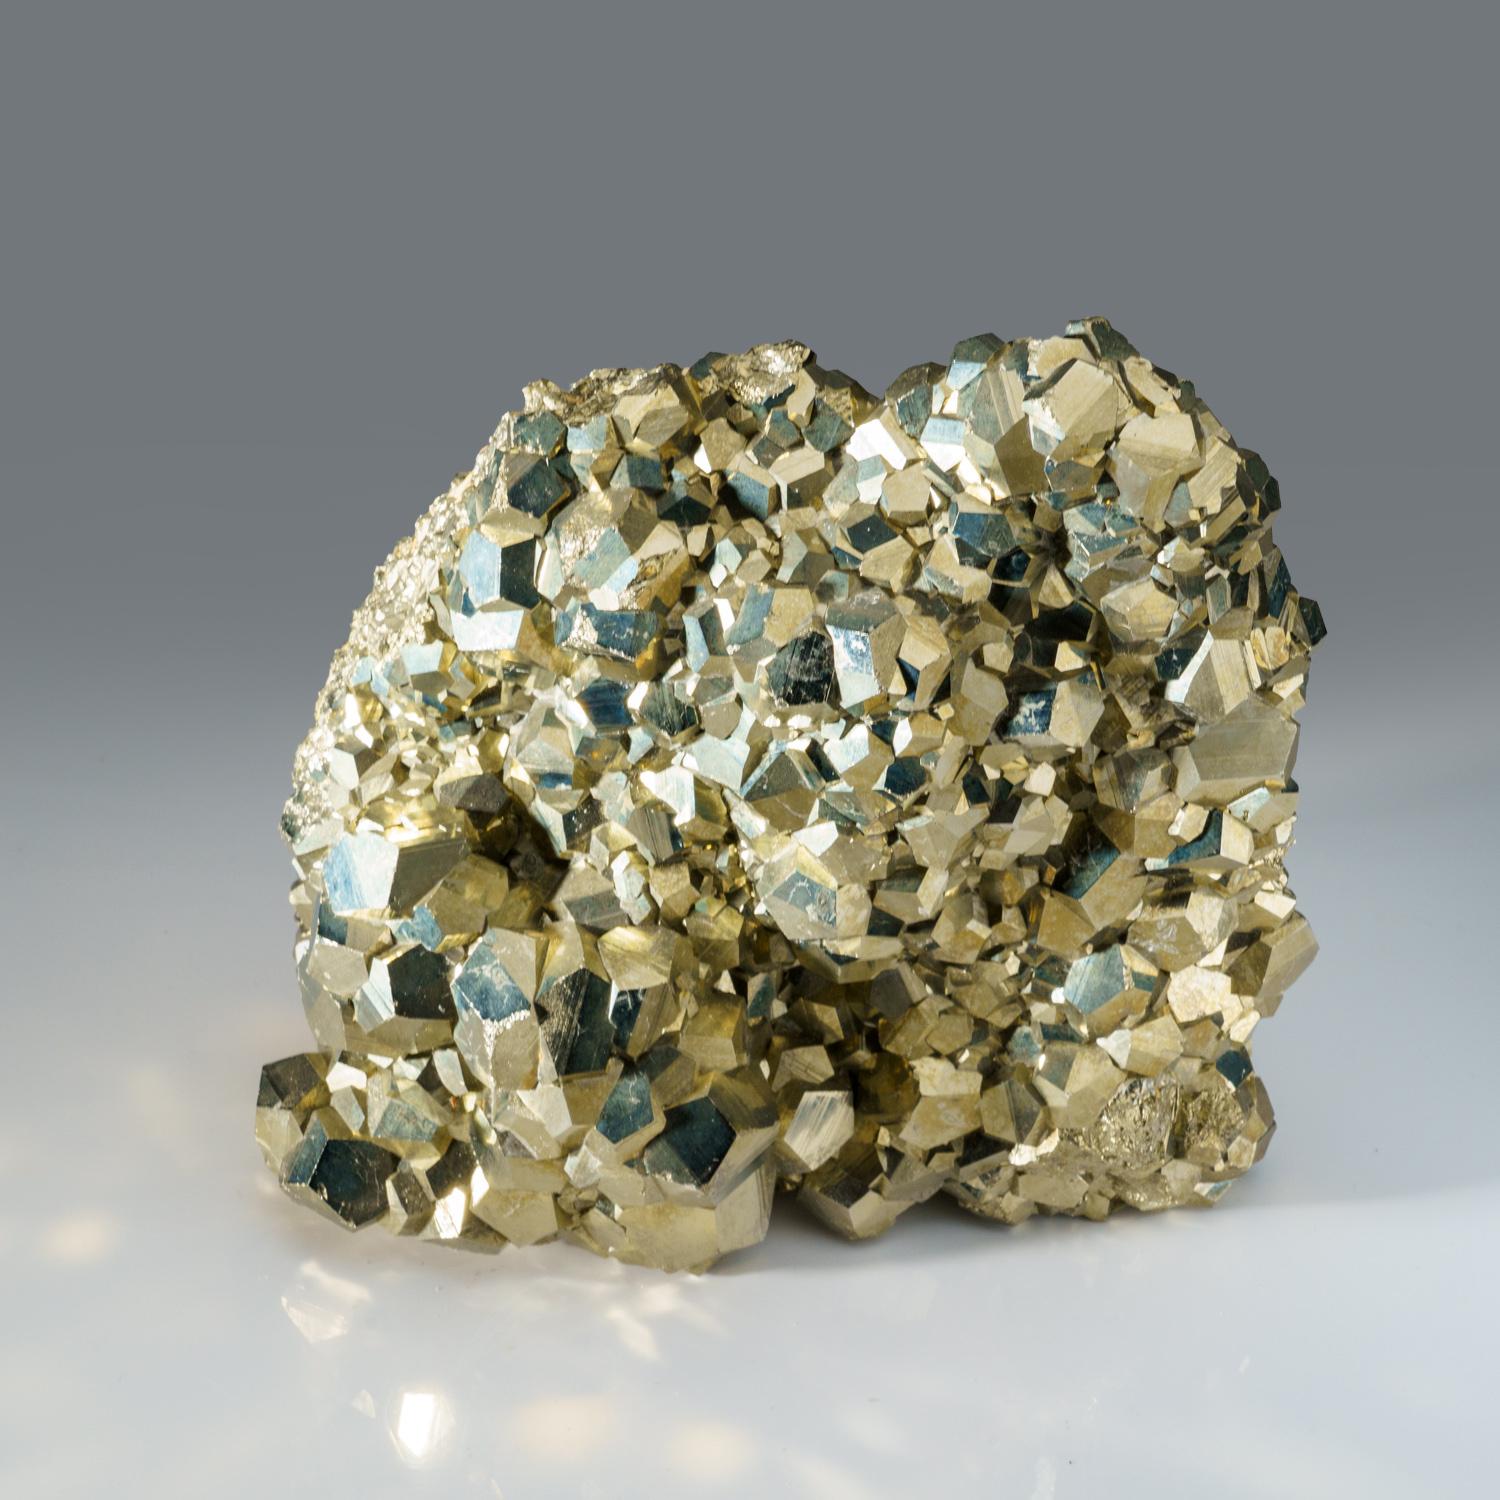 American Dodecahedron Pyrite From Quiruvilca District, Santiago de Chuco Province, Peru For Sale